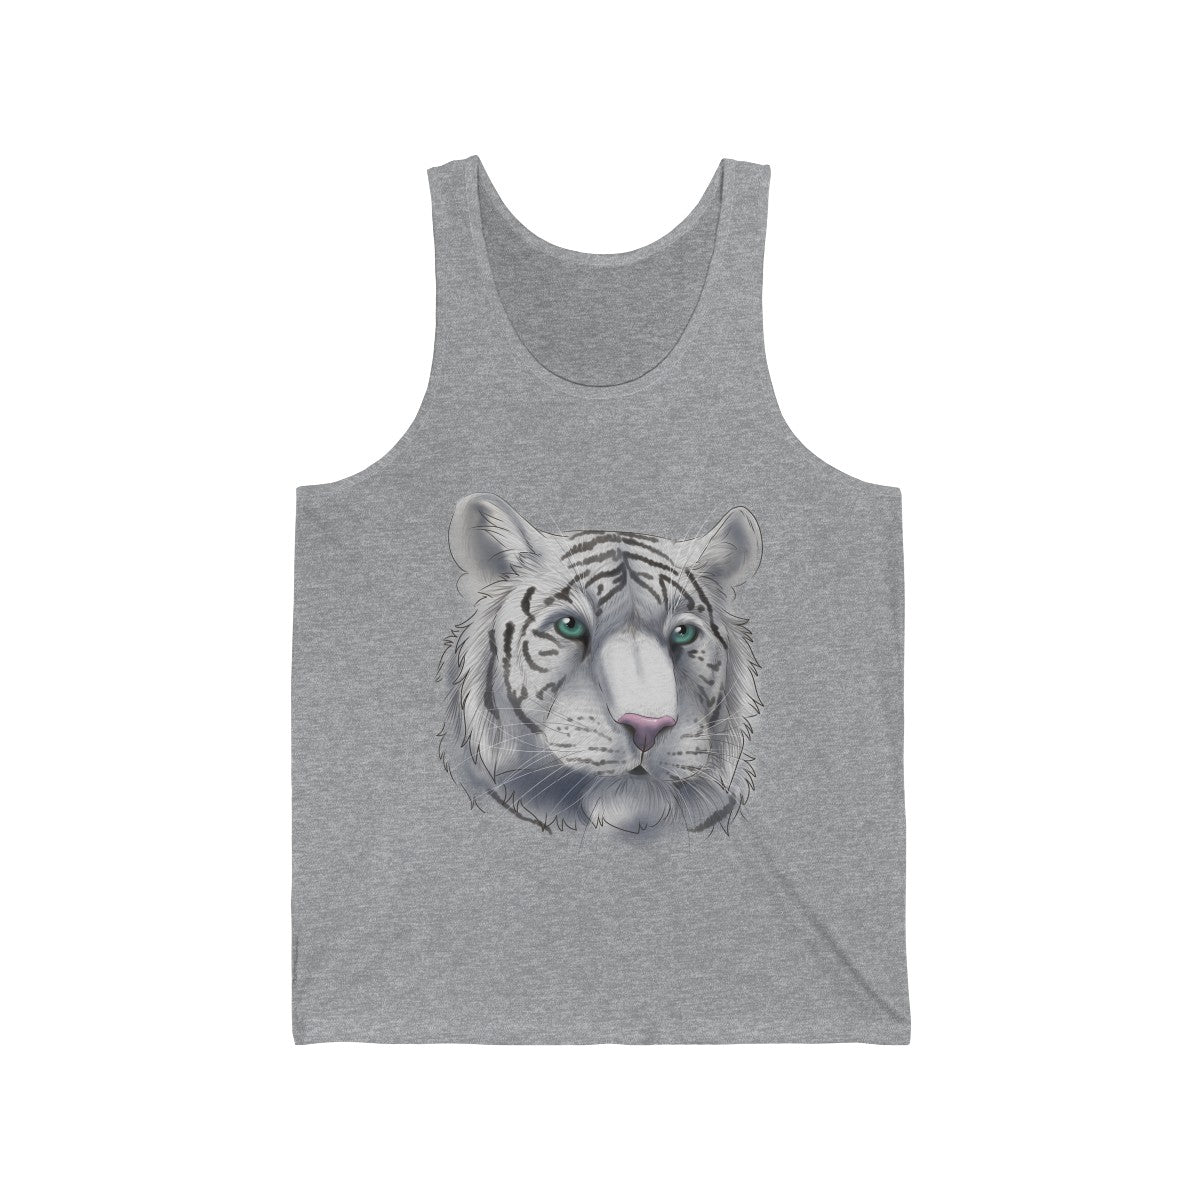 White Tiger - Tank Top Tank Top Dire Creatures Heather XS 